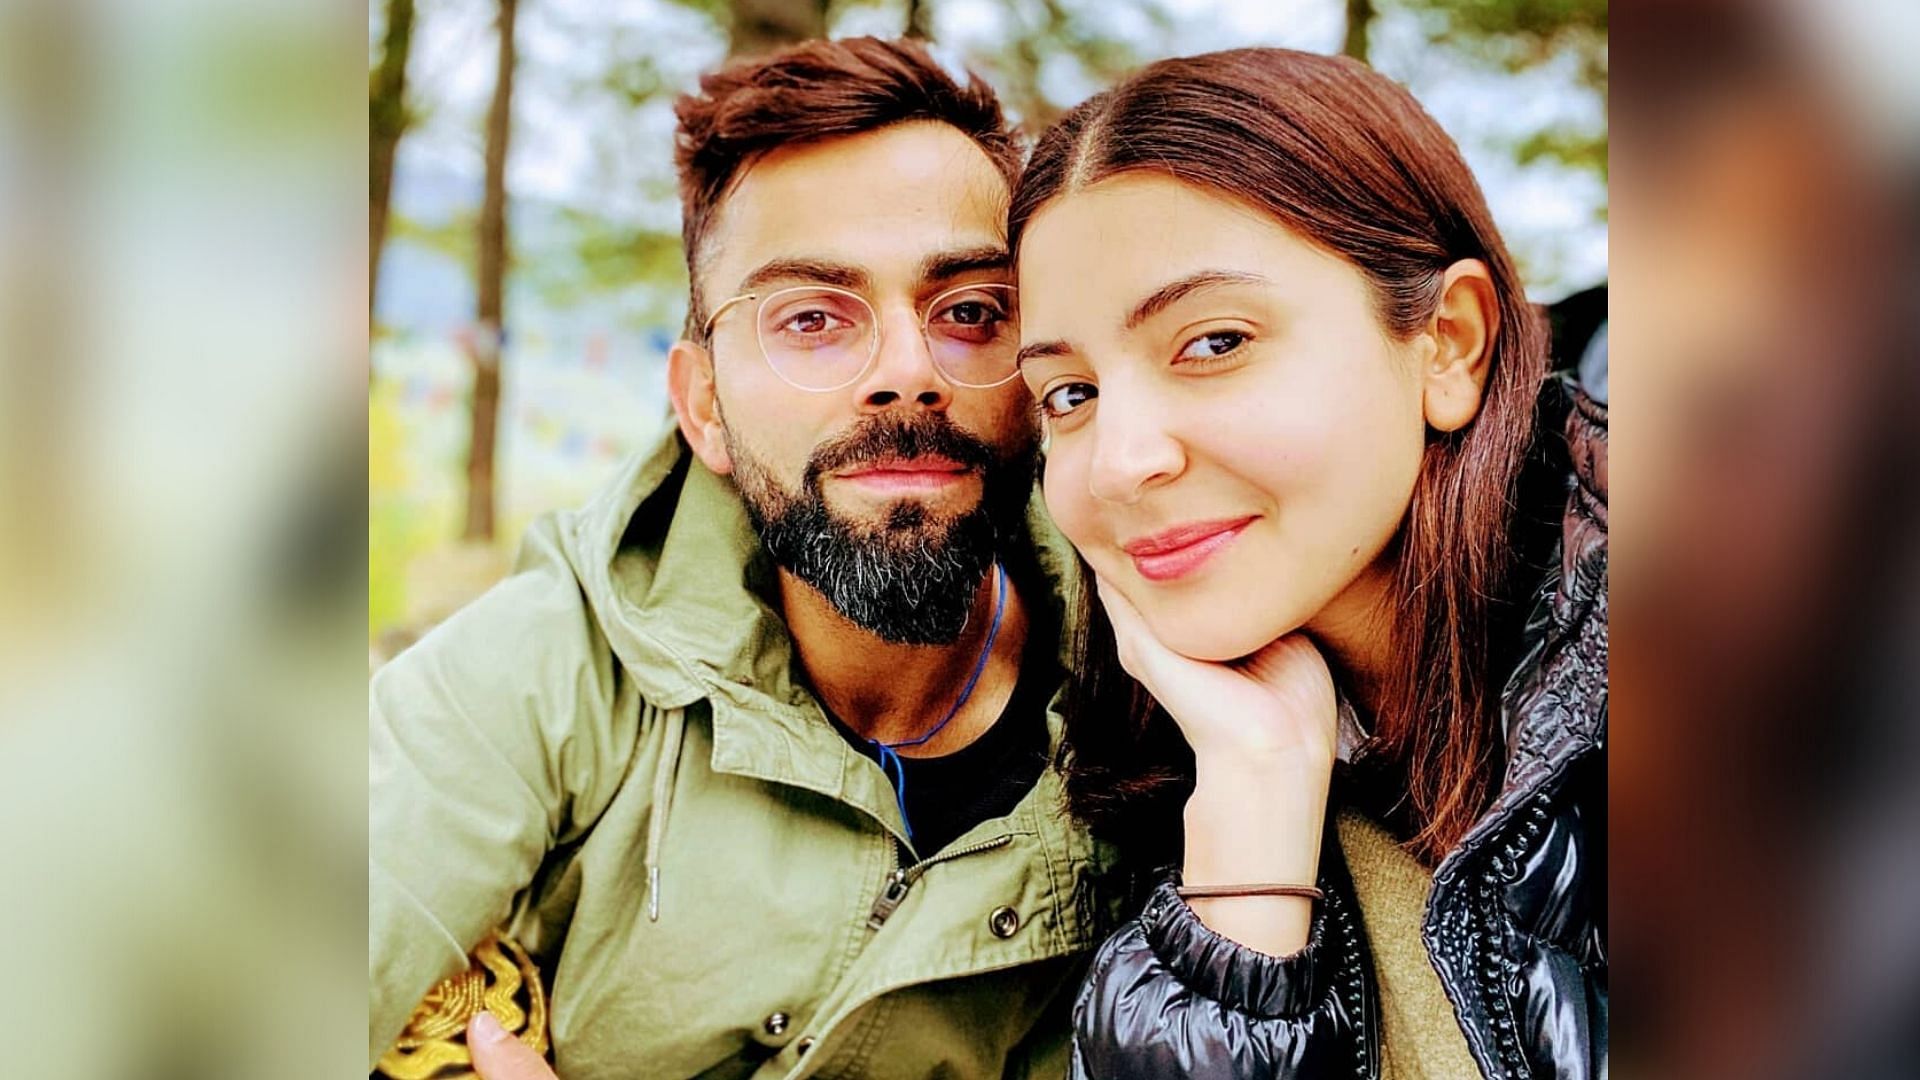 Virat Kohli and Anushka Sharma shared a video where they spoke about the importance of staying home to stay safe amid the COVID-19 outbreak.